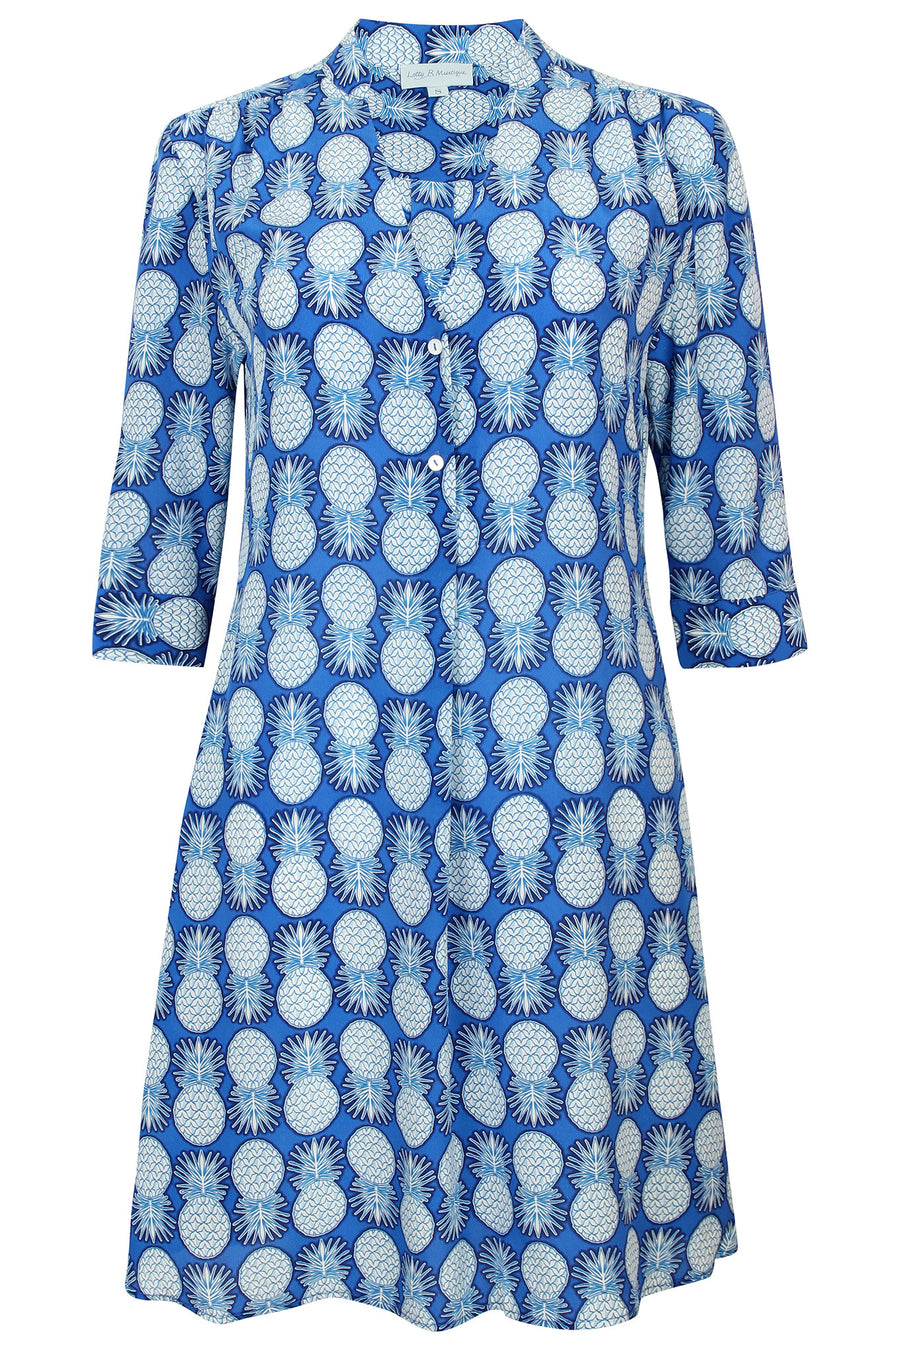 Lotty B Flared Dress in Silk Crepe-de-Chine: PINEAPPLE - BLUE Mustique life